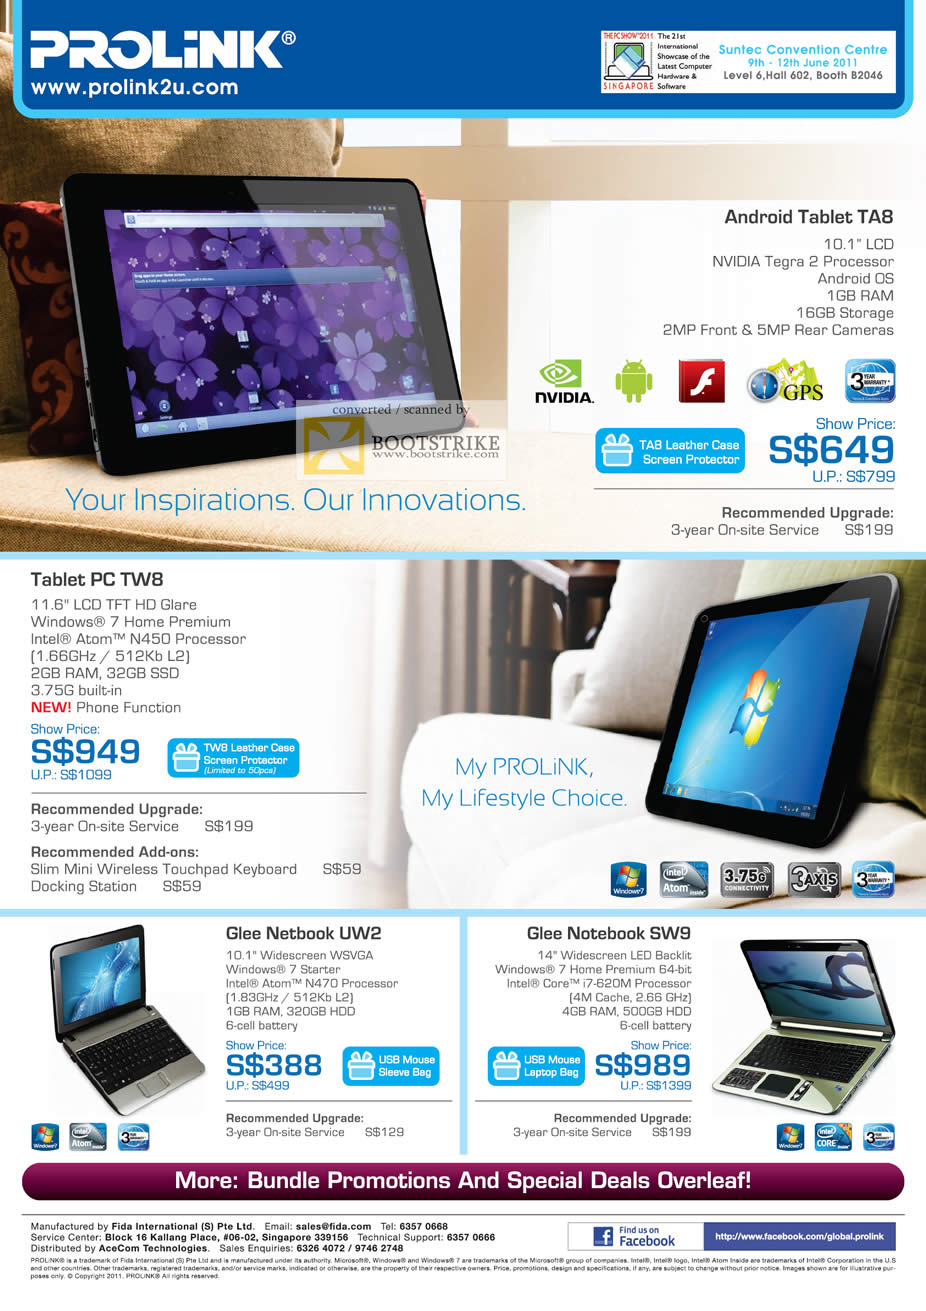 PC Show 2011 price list image brochure of Prolink Tablets Notebooks Netbooks Android TA8 TW8 Glee UW2 SW9